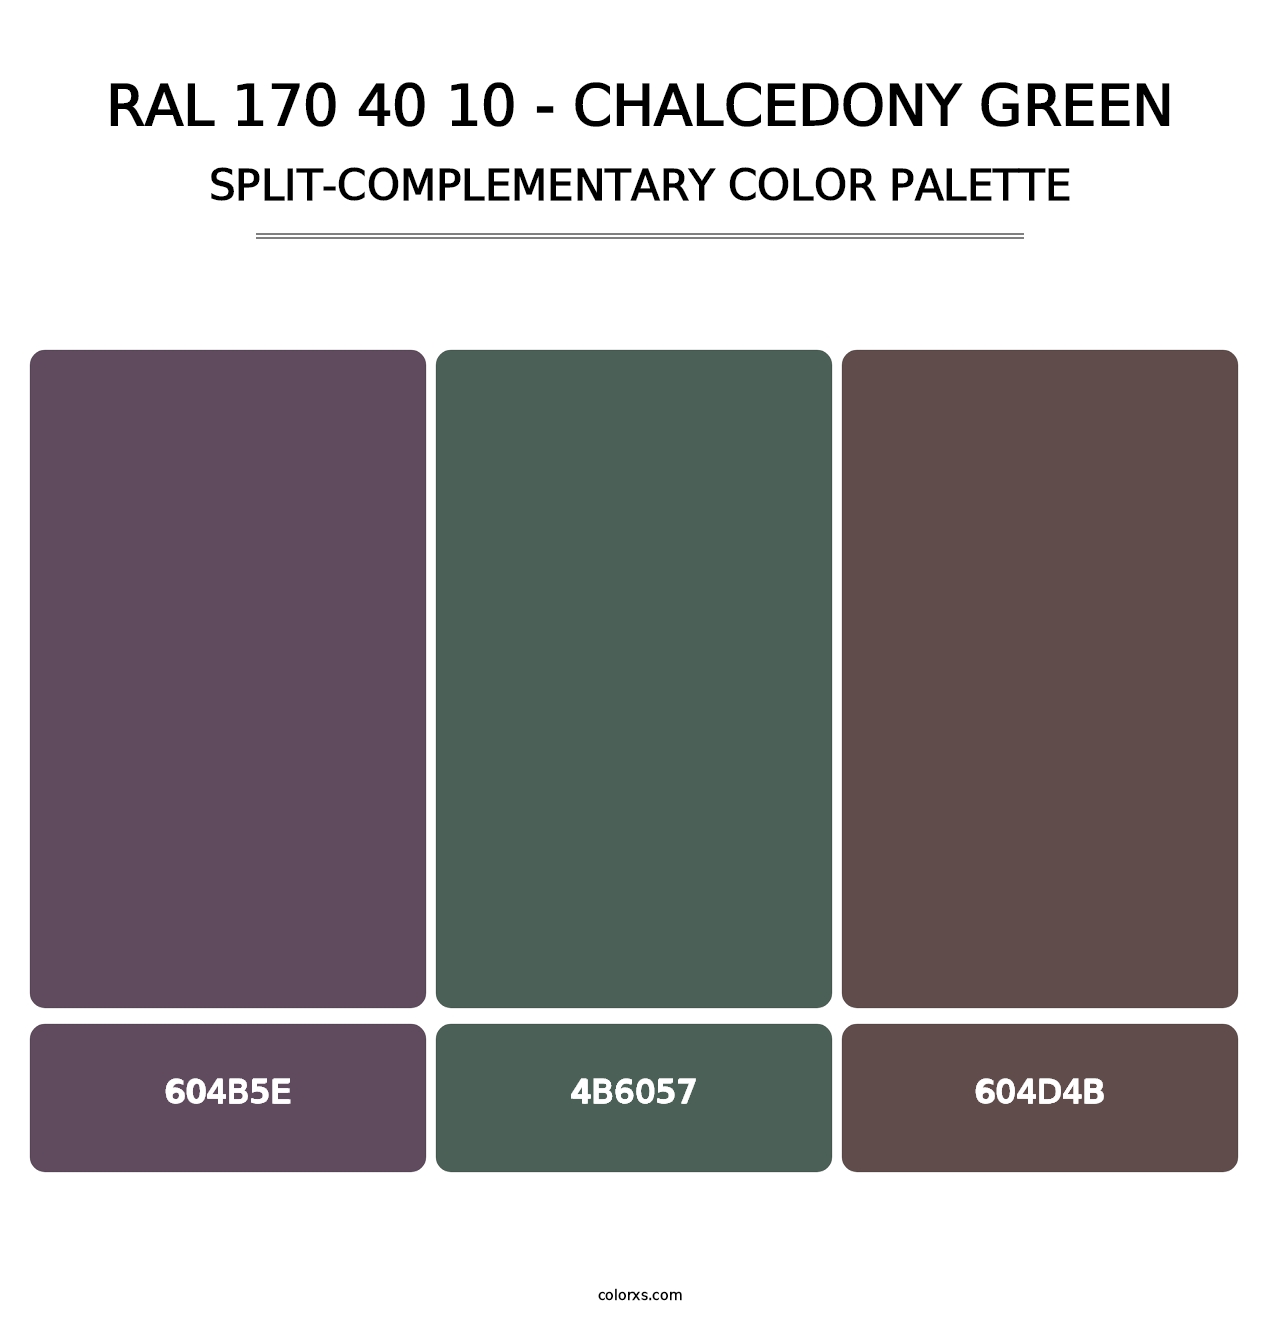 RAL 170 40 10 - Chalcedony Green - Split-Complementary Color Palette